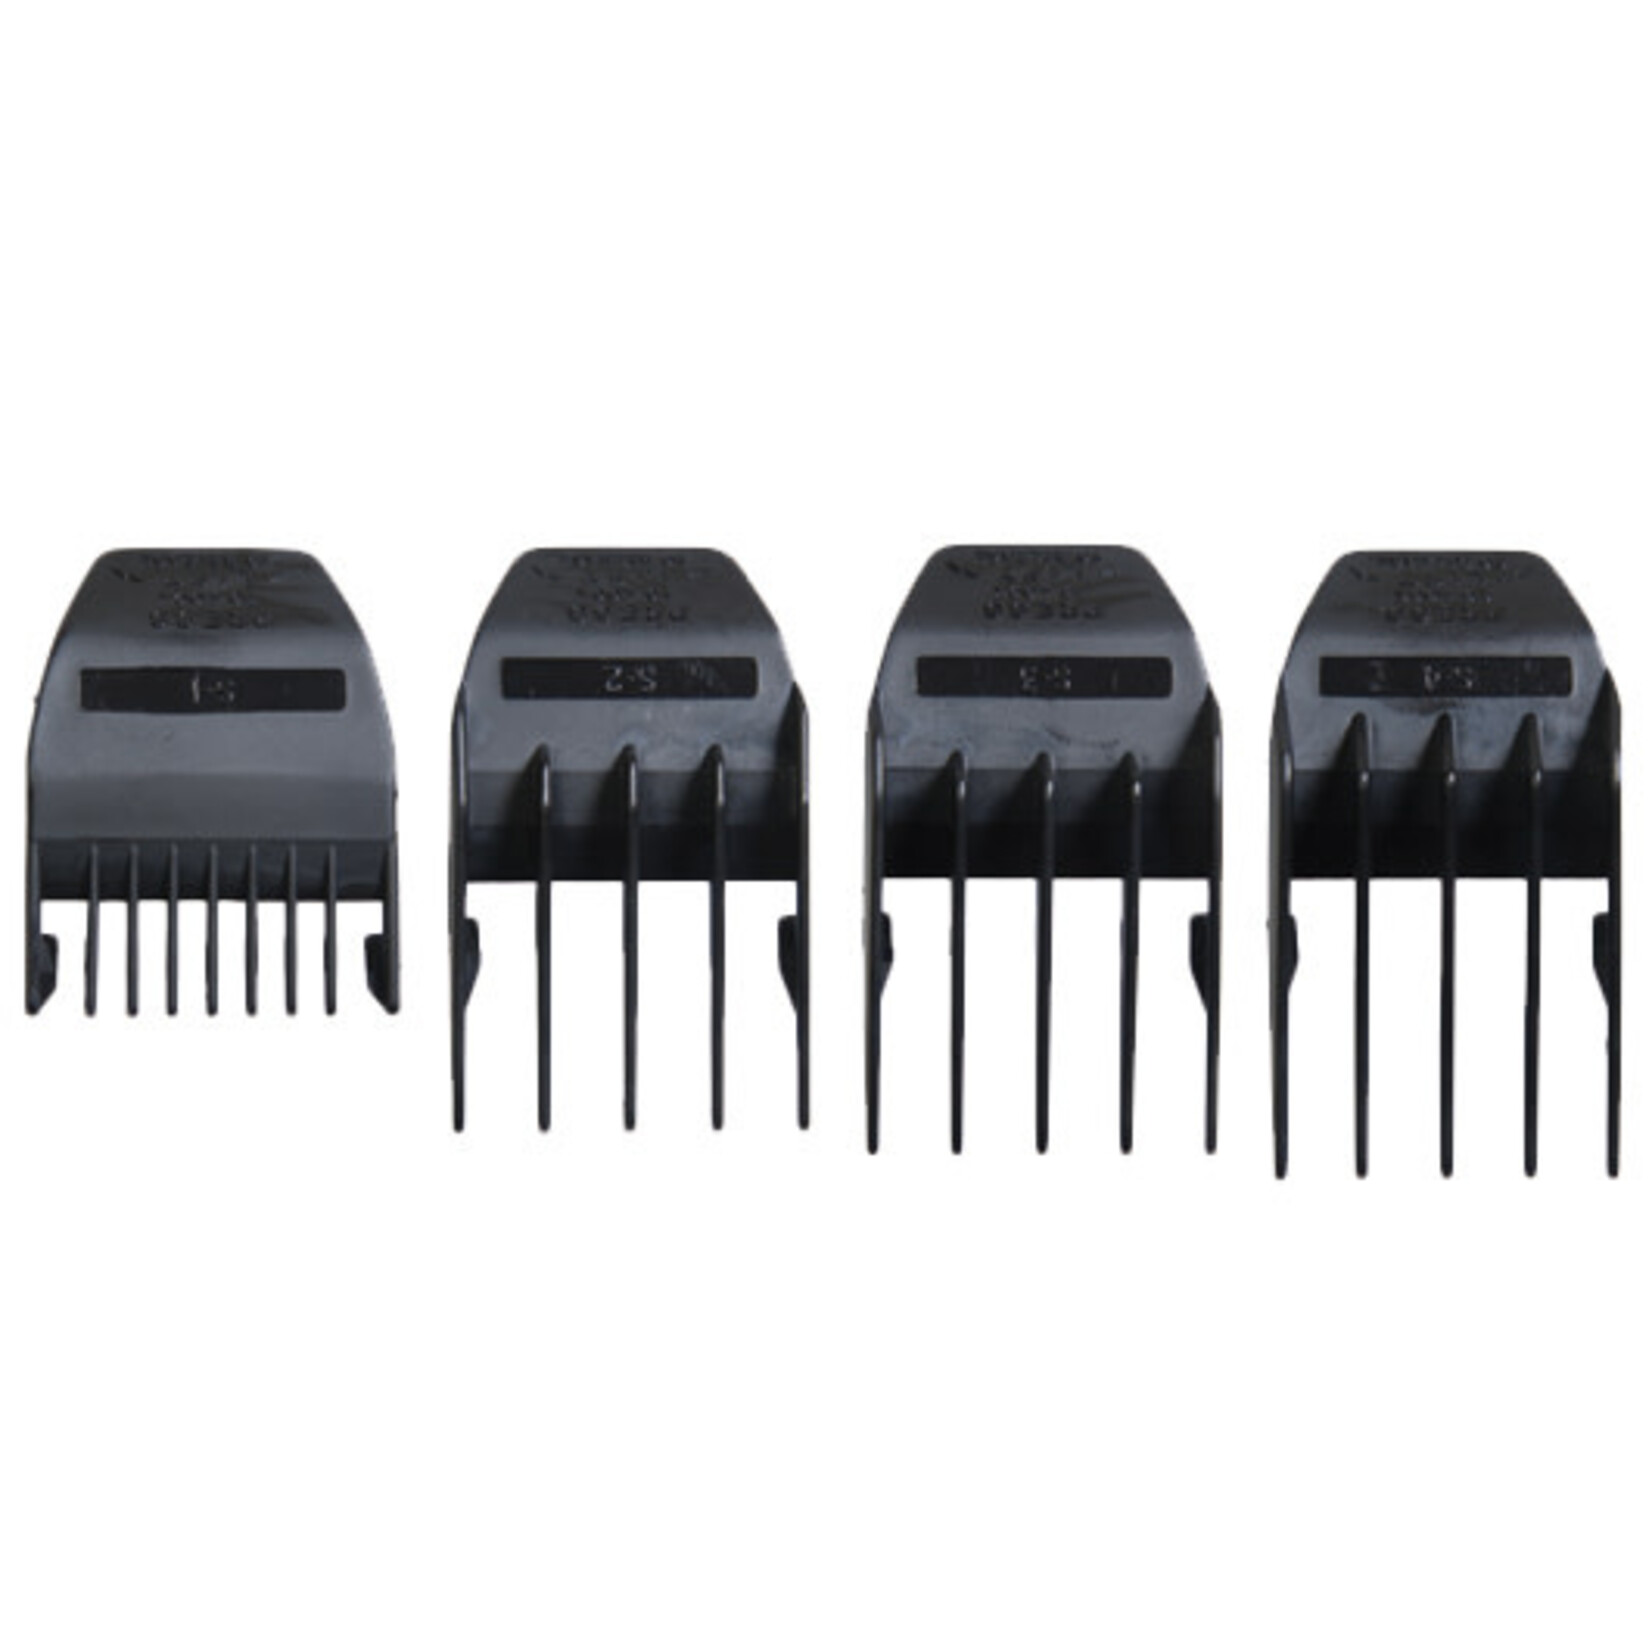 Wahl Pro Wahl - Set of 4 black cutting guides